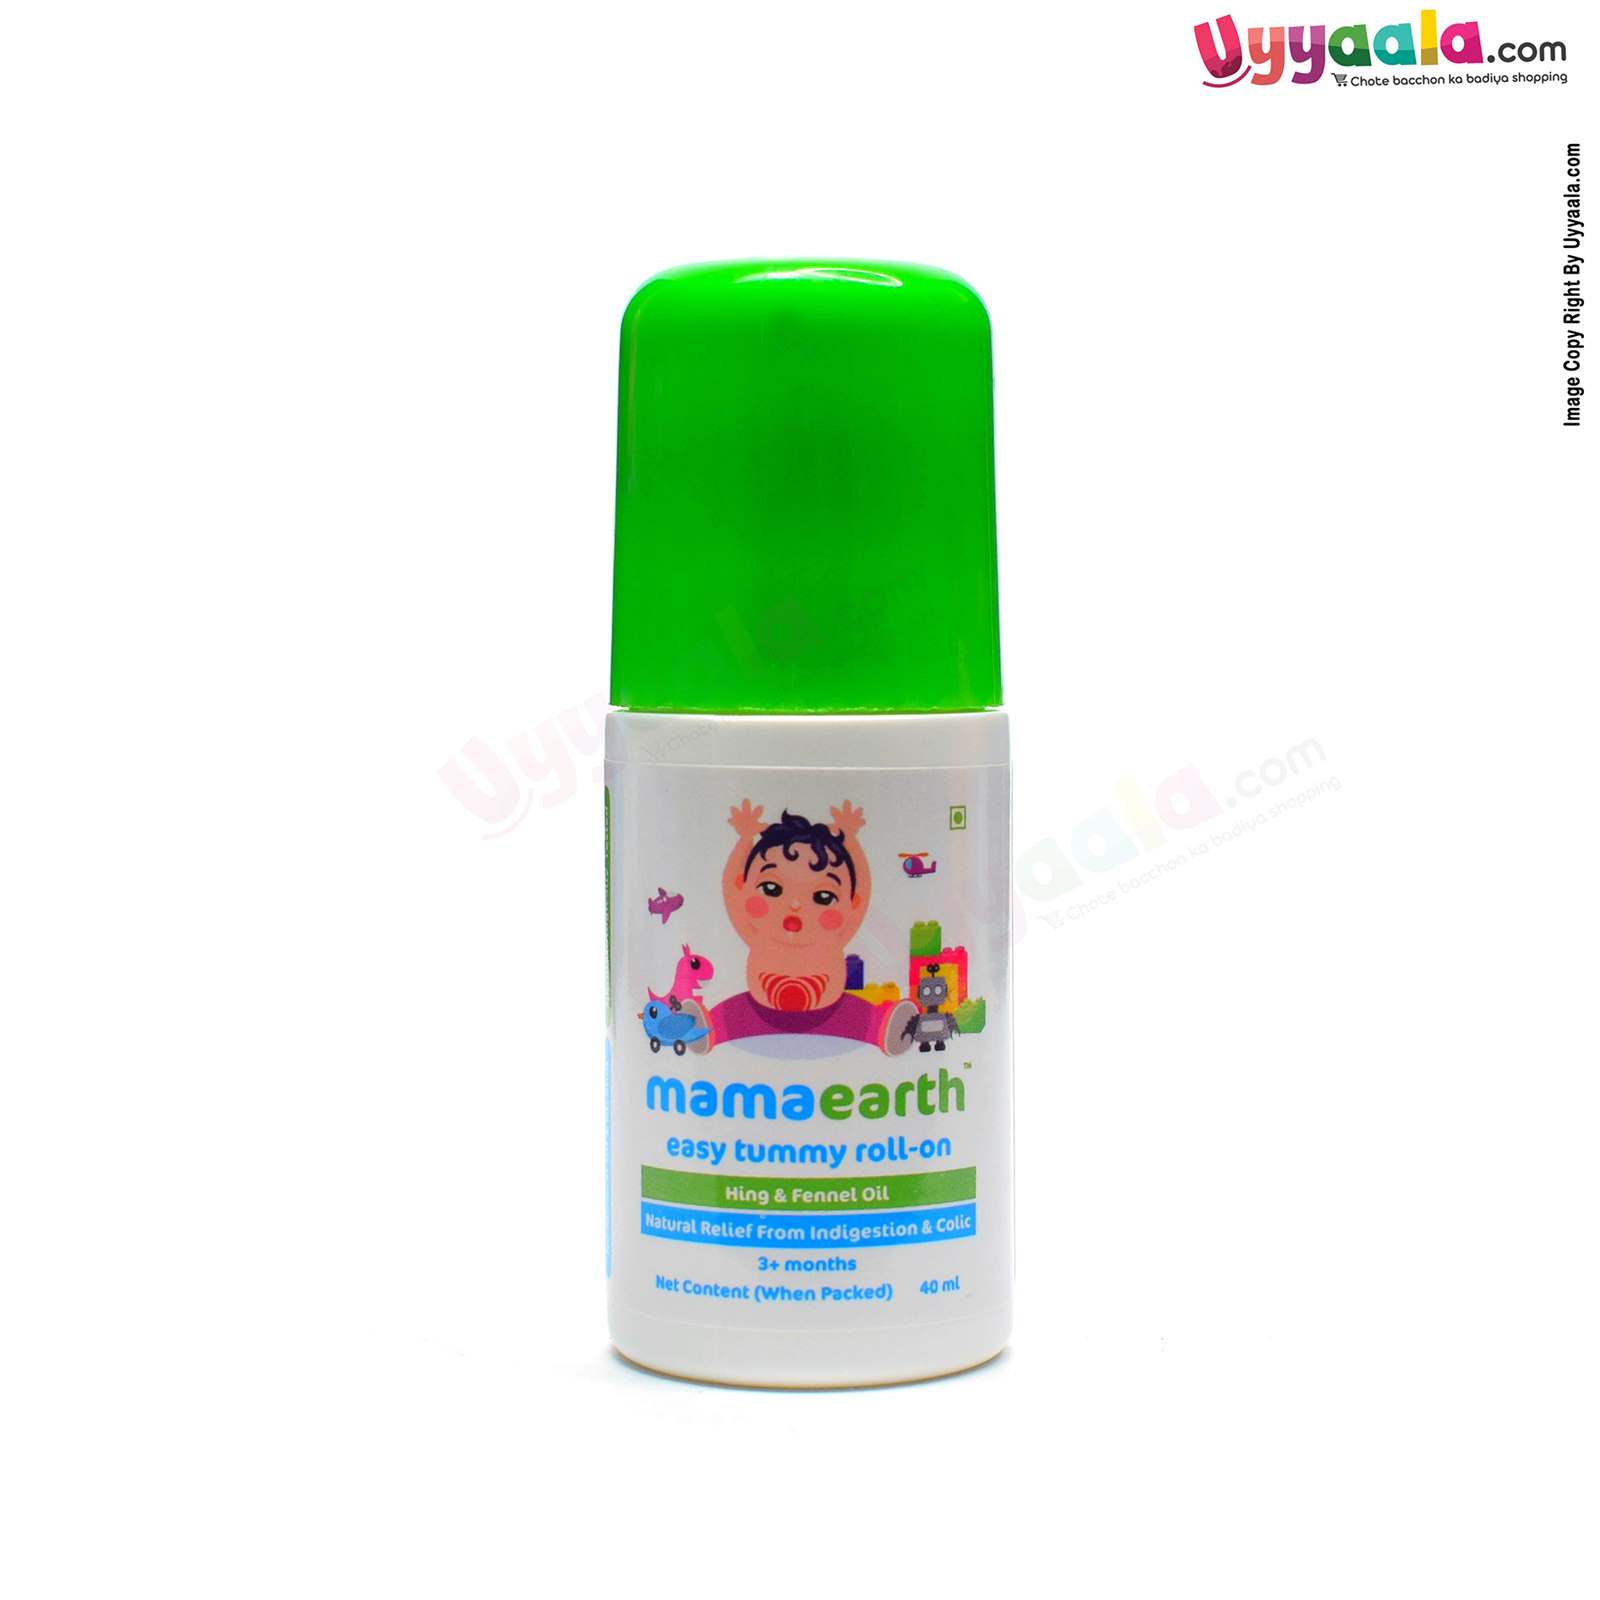 Mamaearth Baby Tummy Roll On for Indigestion and Colic Relief - 40ml